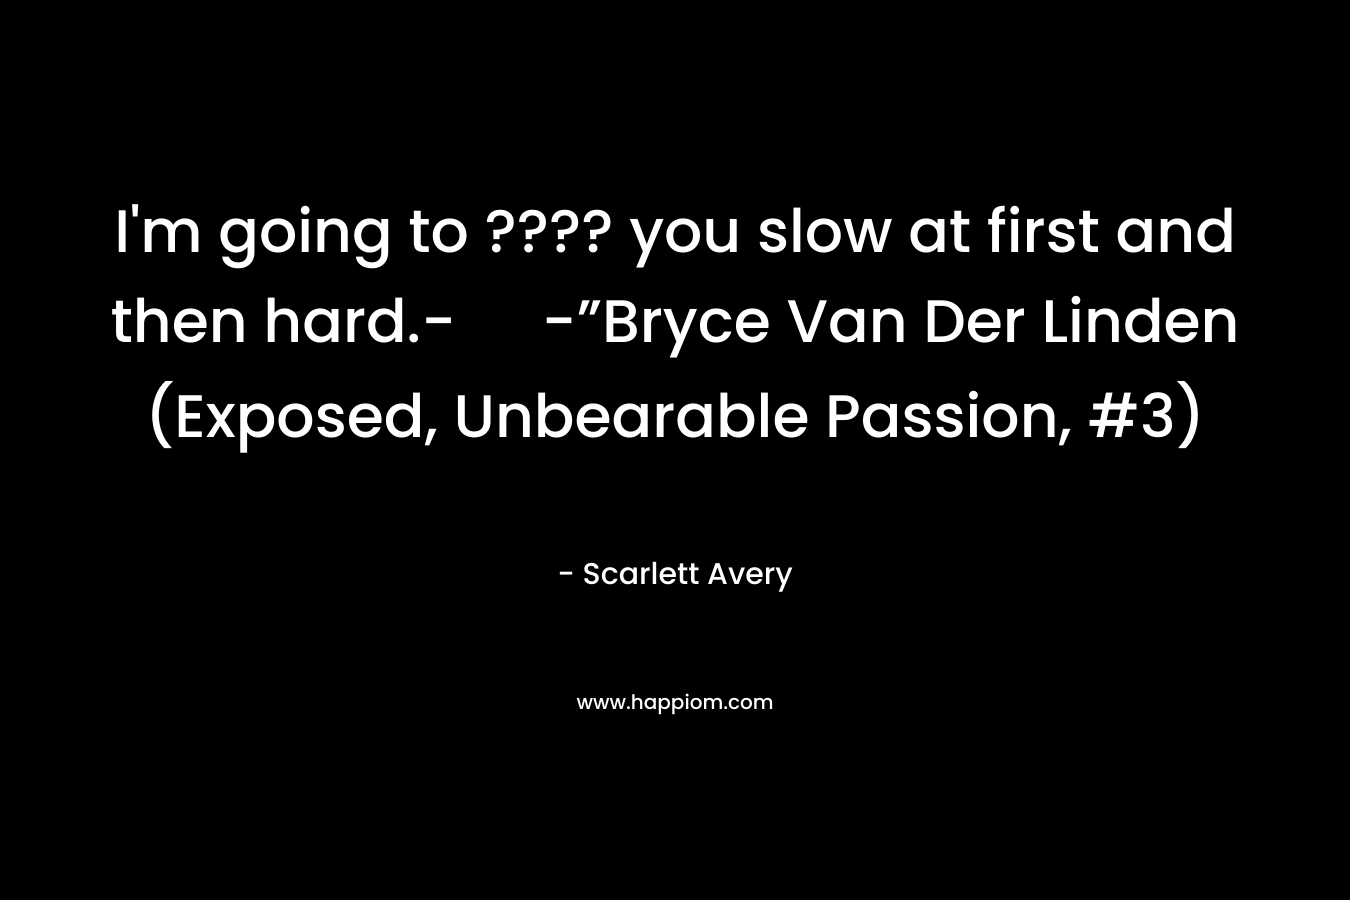 I'm going to ???? you slow at first and then hard.- -”Bryce Van Der Linden (Exposed, Unbearable Passion, #3)